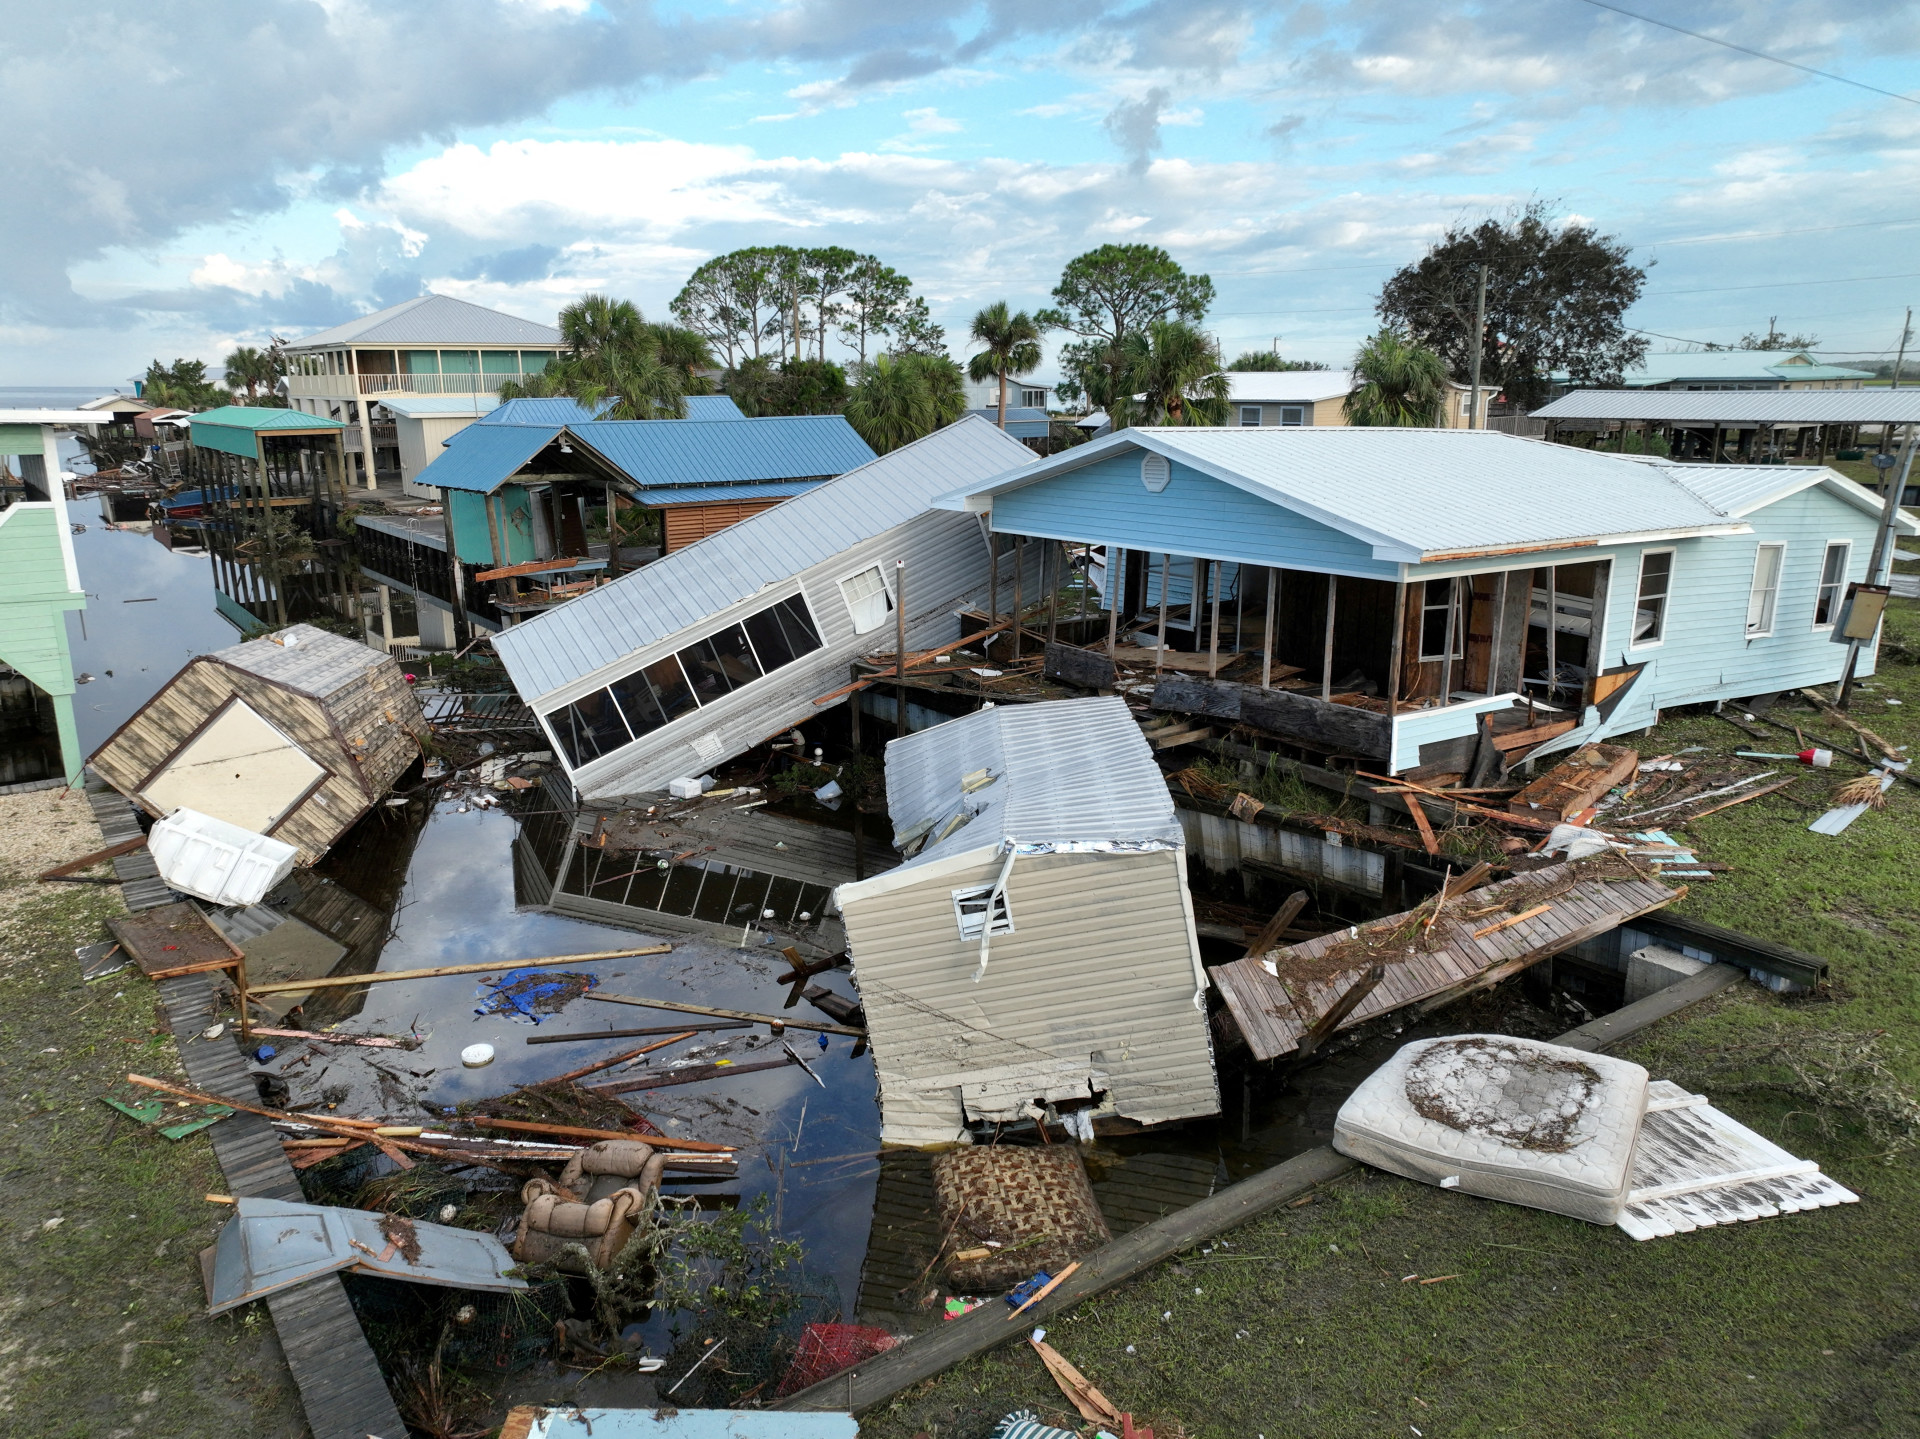 Reuters: View of a damaged property after the arrival of Hurricane Idalia in Horseshoe Beach, Florida, U.S., August 31, 2023. REUTERS/Julio Cesar Chavez/File Photo